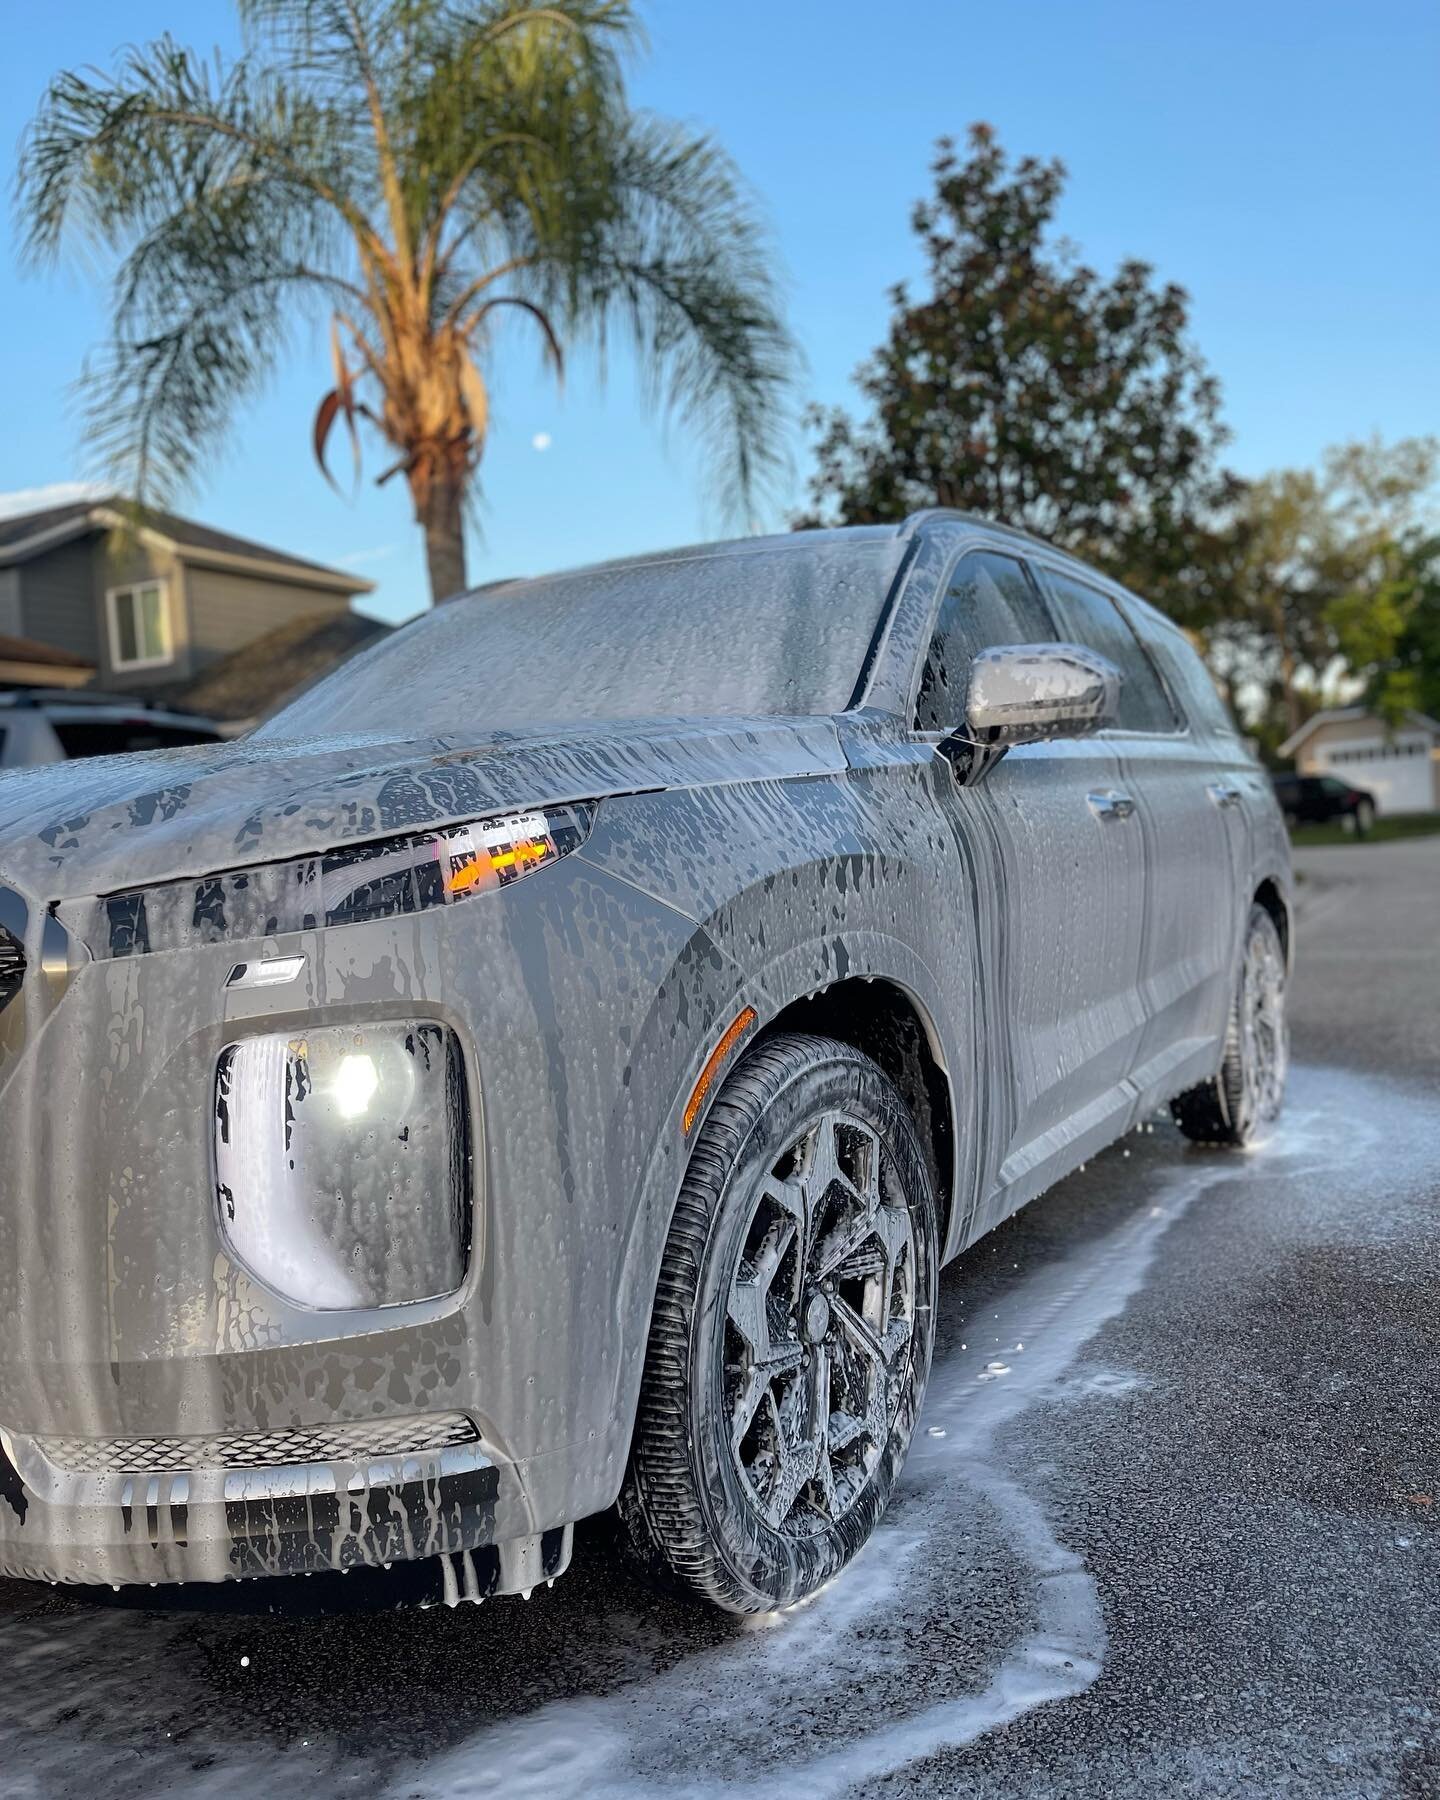 Hyundai Palisade received a level 2 detail, usually we do a maintenance detail on this one about once a month but this time it went over a month and a couple of road trips to the beach. Came out looking great and cliente were extremely satisfied 🙌🏼